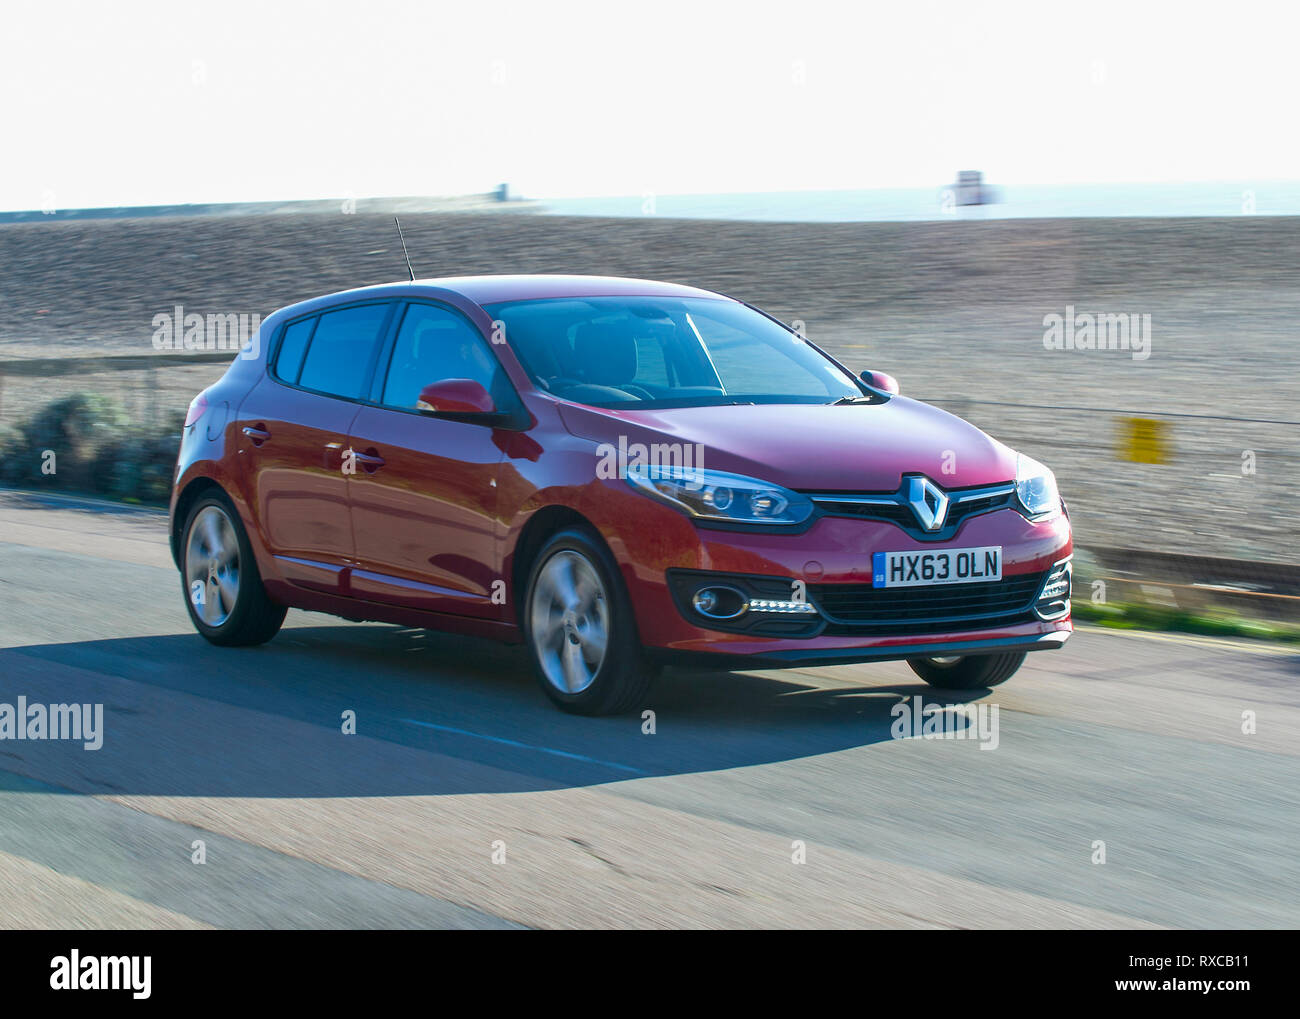 2014 Renault Megane Coupe 1.5 diesel, C- segment mid size modern French car  Stock Photo - Alamy